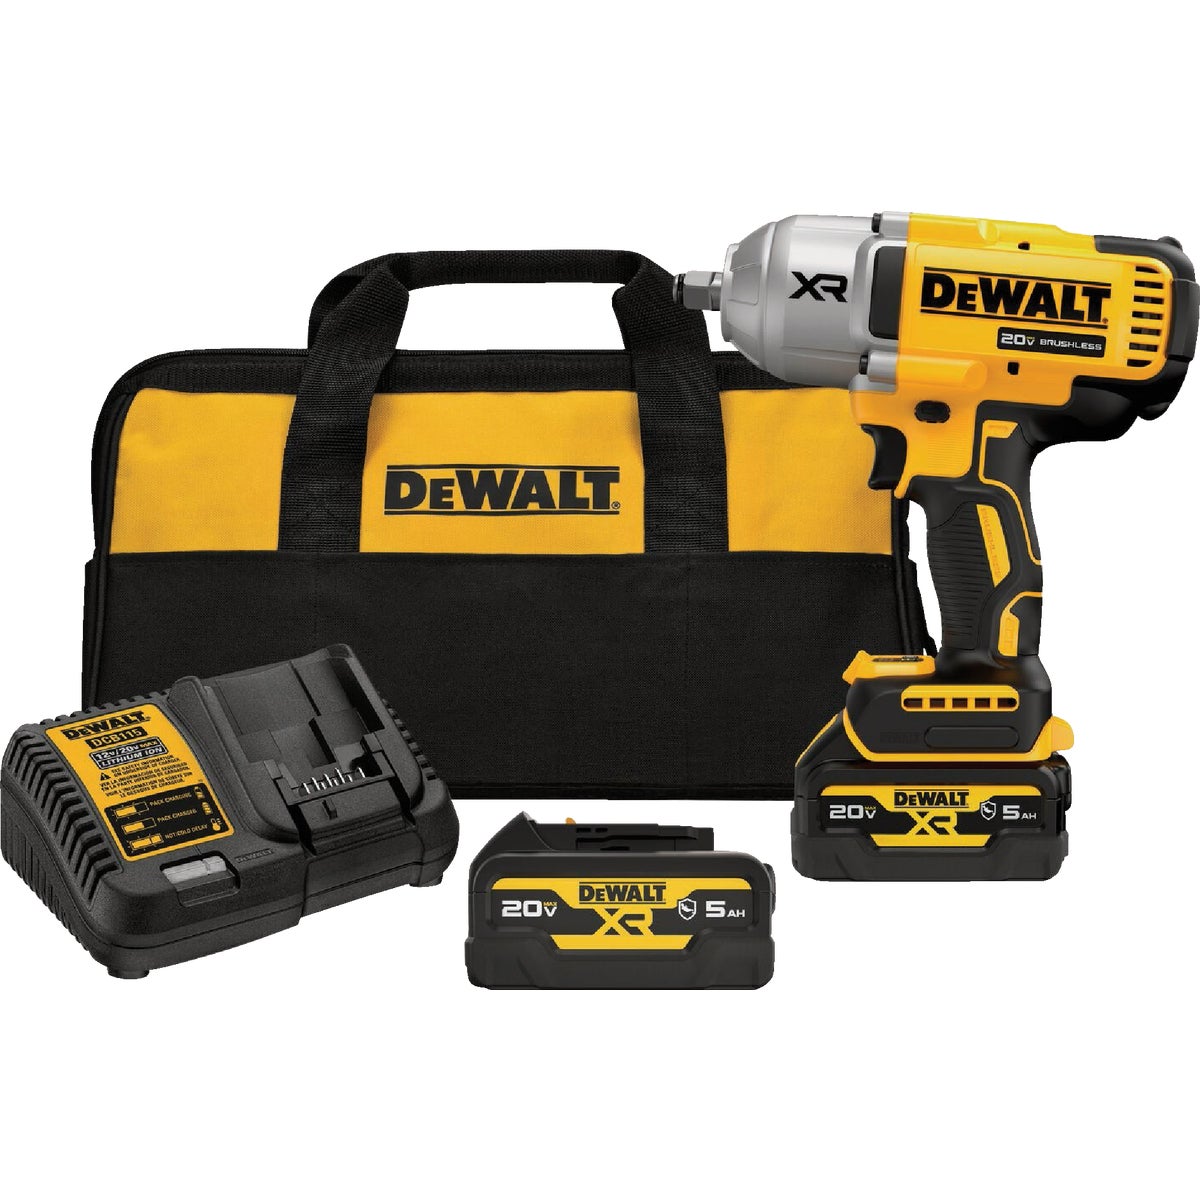 DEWALT 20 Volt MAX XR Lithium-Ion 1/2 In. Cordless Torque Impact Wrench with Hog Ring Anvil Kit (2-Batteries)